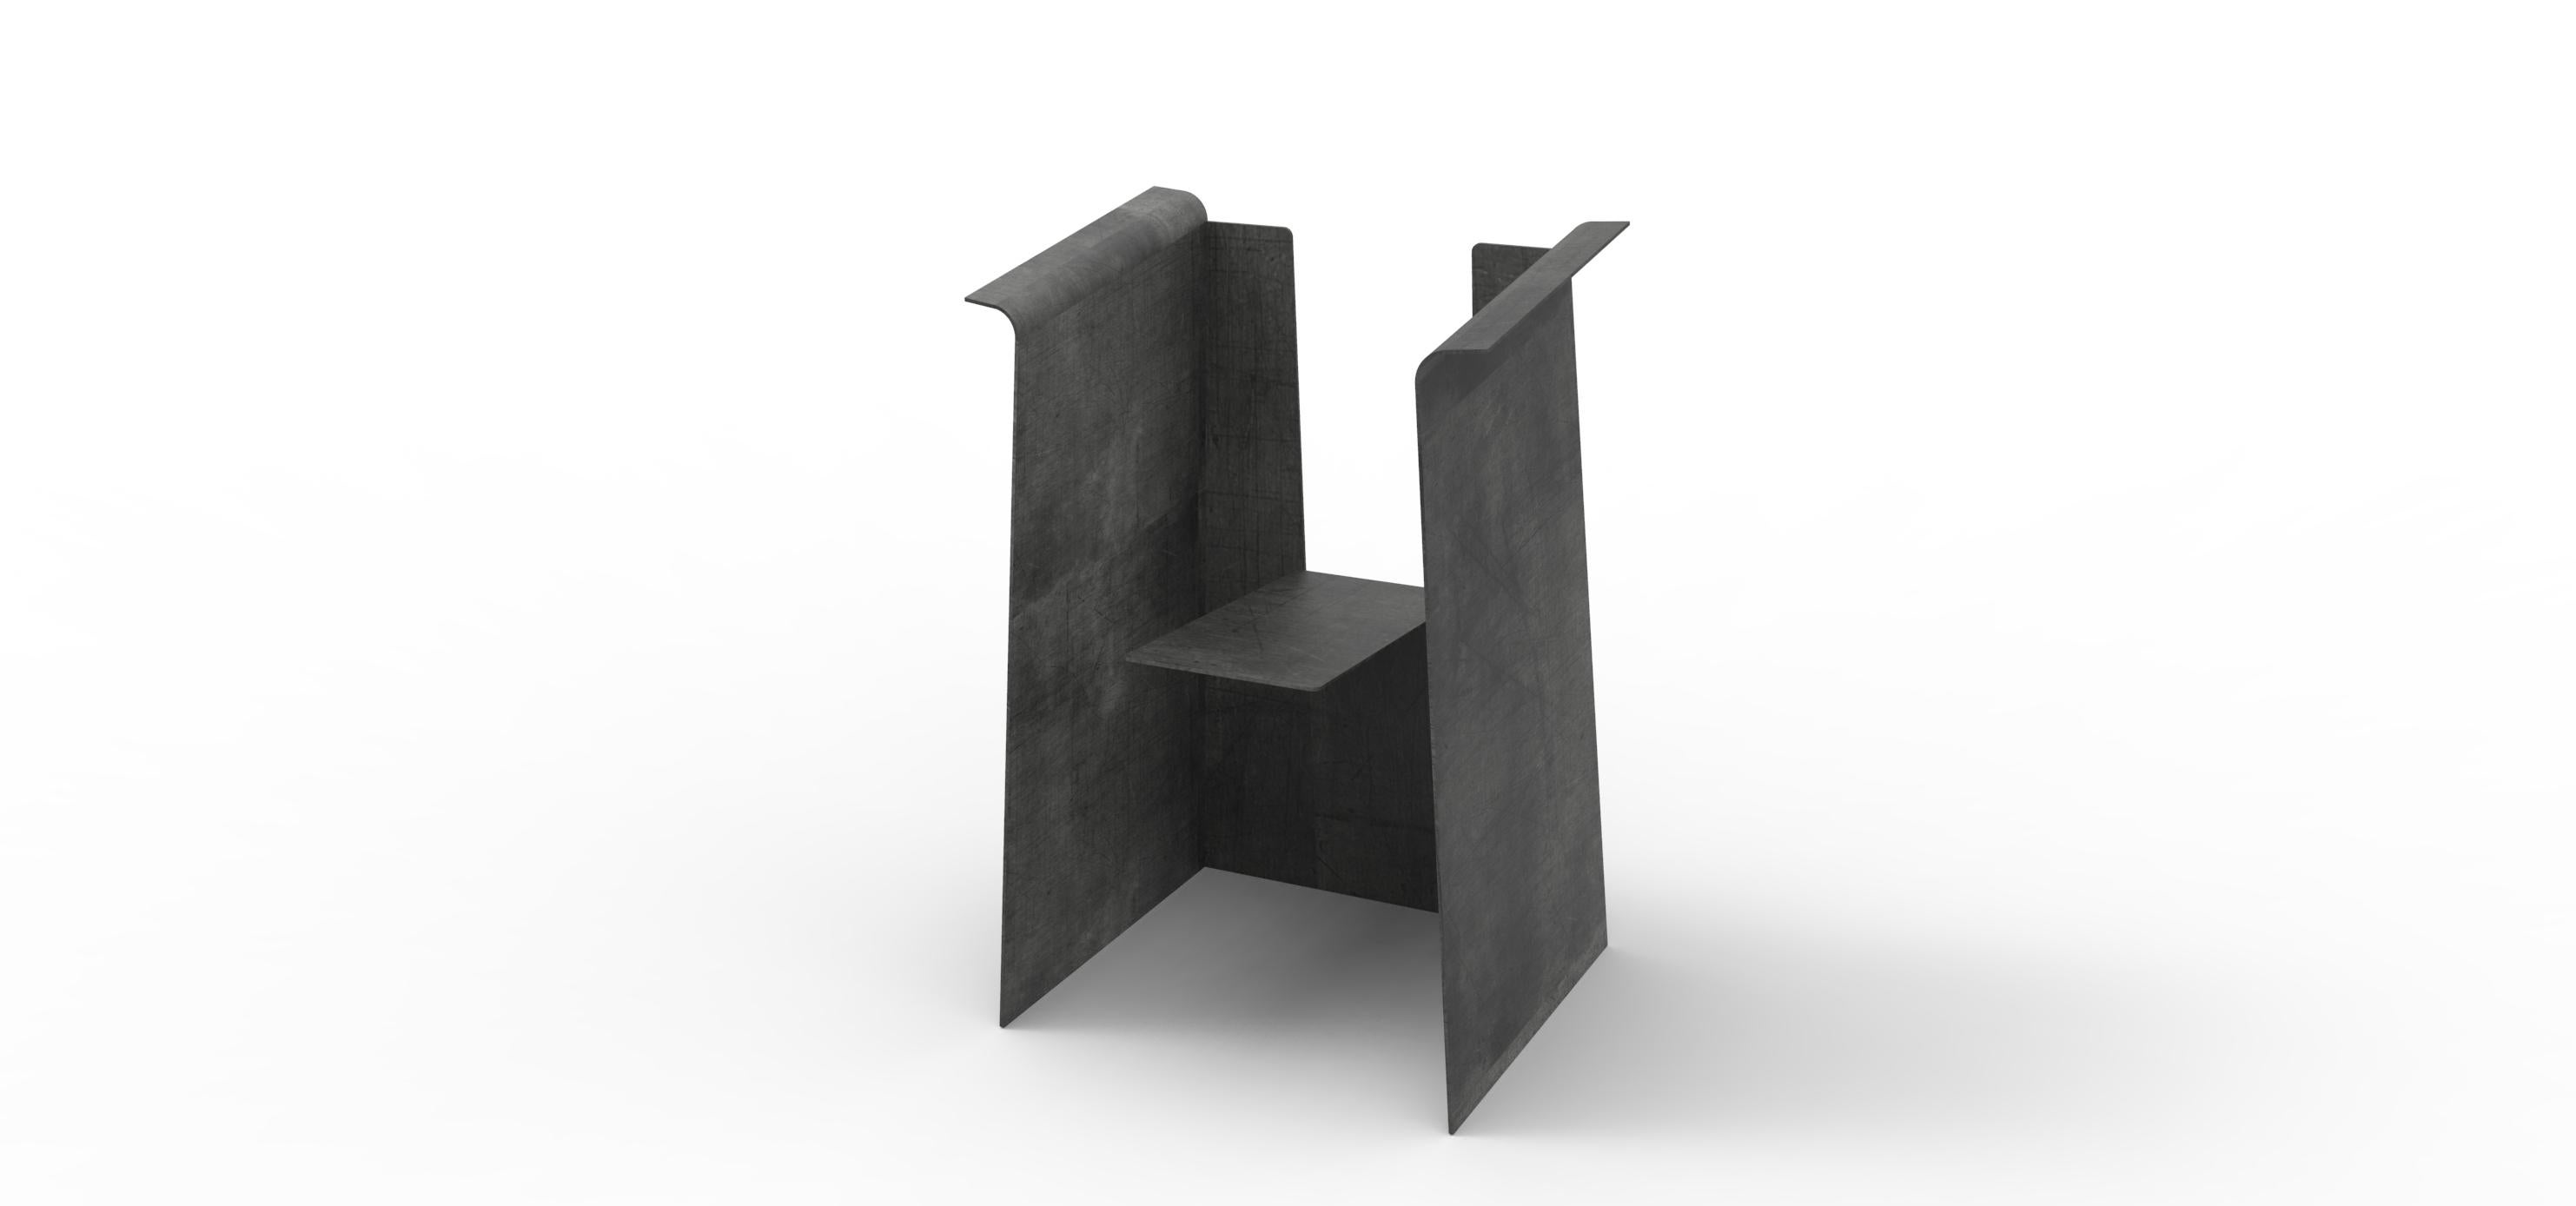 Iron Y stool by Neil Nenner and Avihai Mizrahi 
Objects 
Dimensions: H 65 x L 48 x W 48 cm
Materials: iron

Avihai Mizrahi (b. 1979, Jerusalem), Independent designer / Artist and lecturer in visual communication, holds a B.des in visual